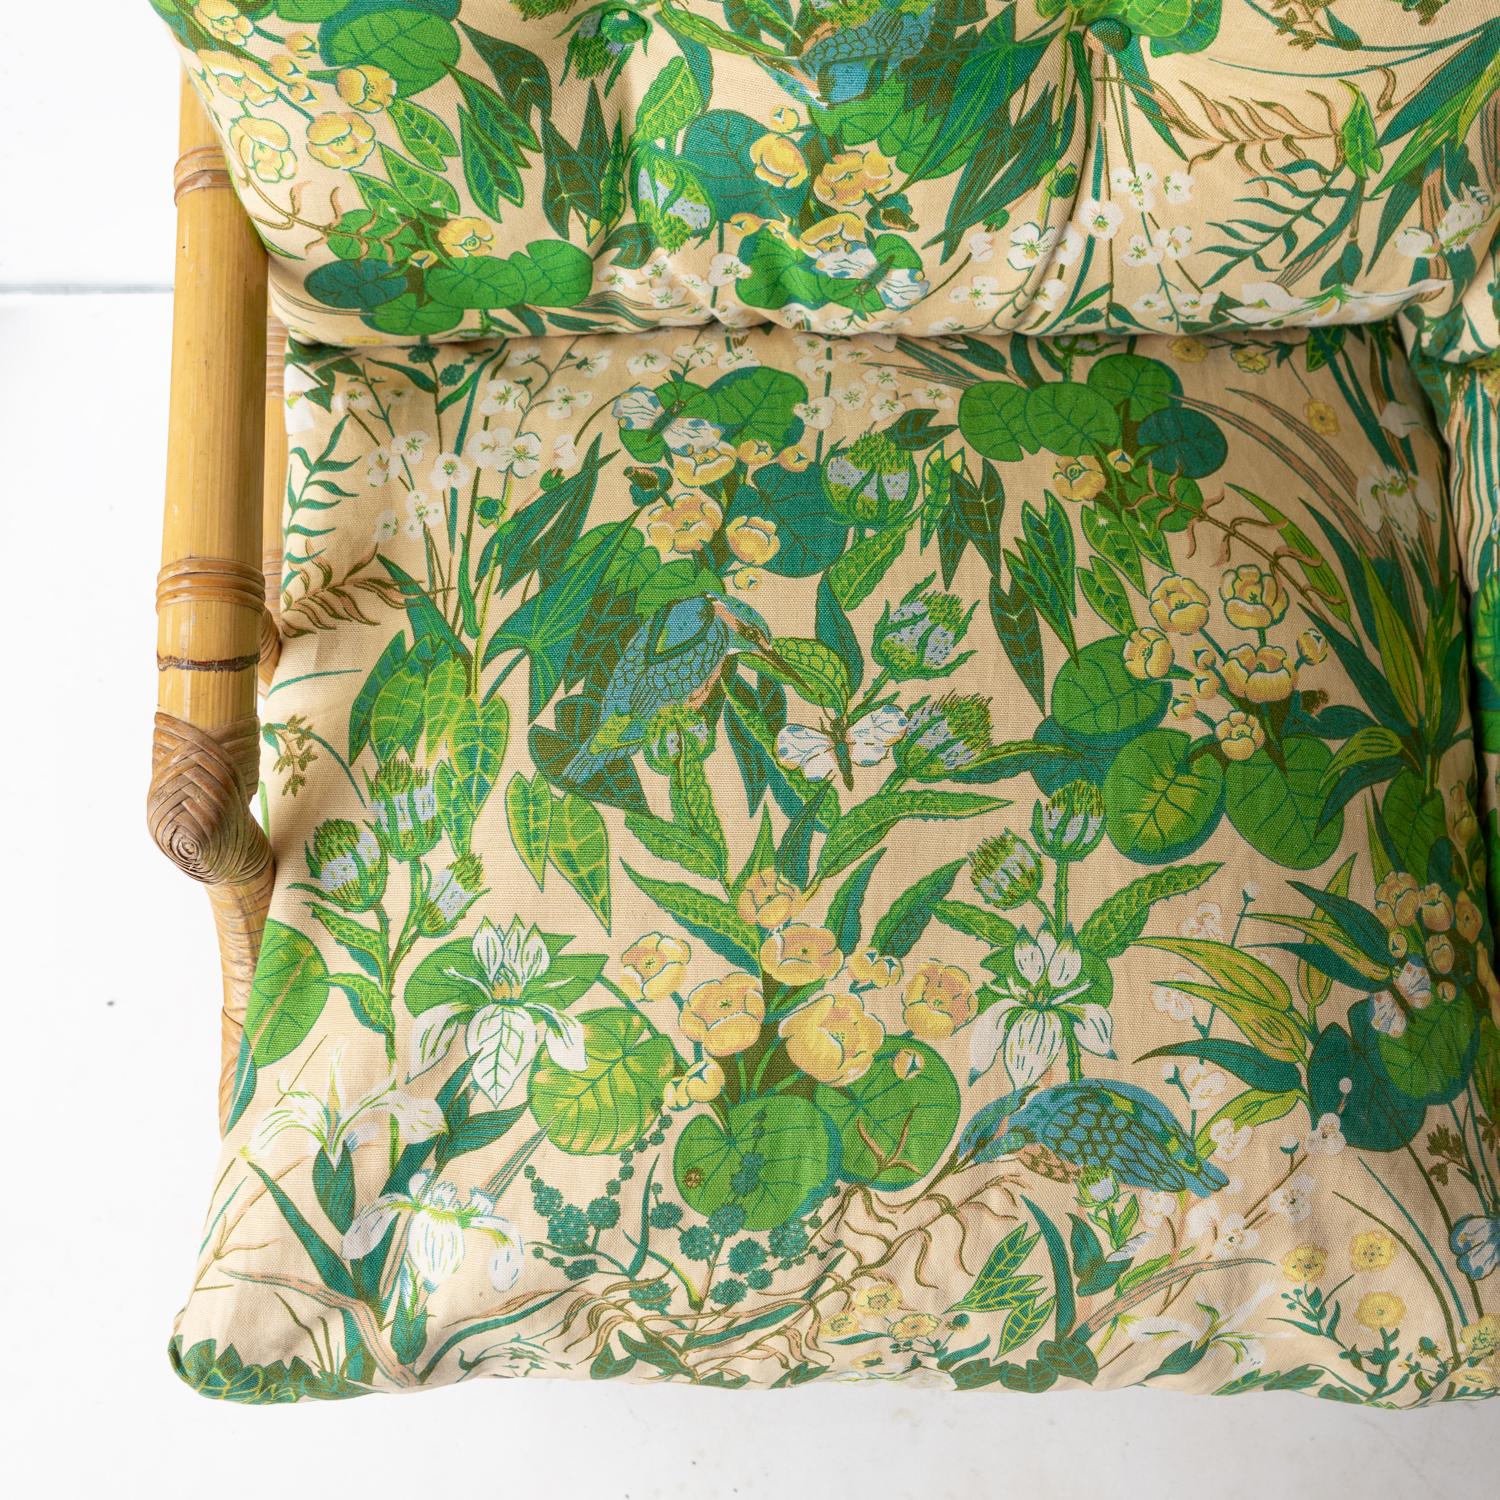 Vintage Italian Floral Upholstered Bamboo And Rattan Sofa By Vivai Del Sud 1970s 3